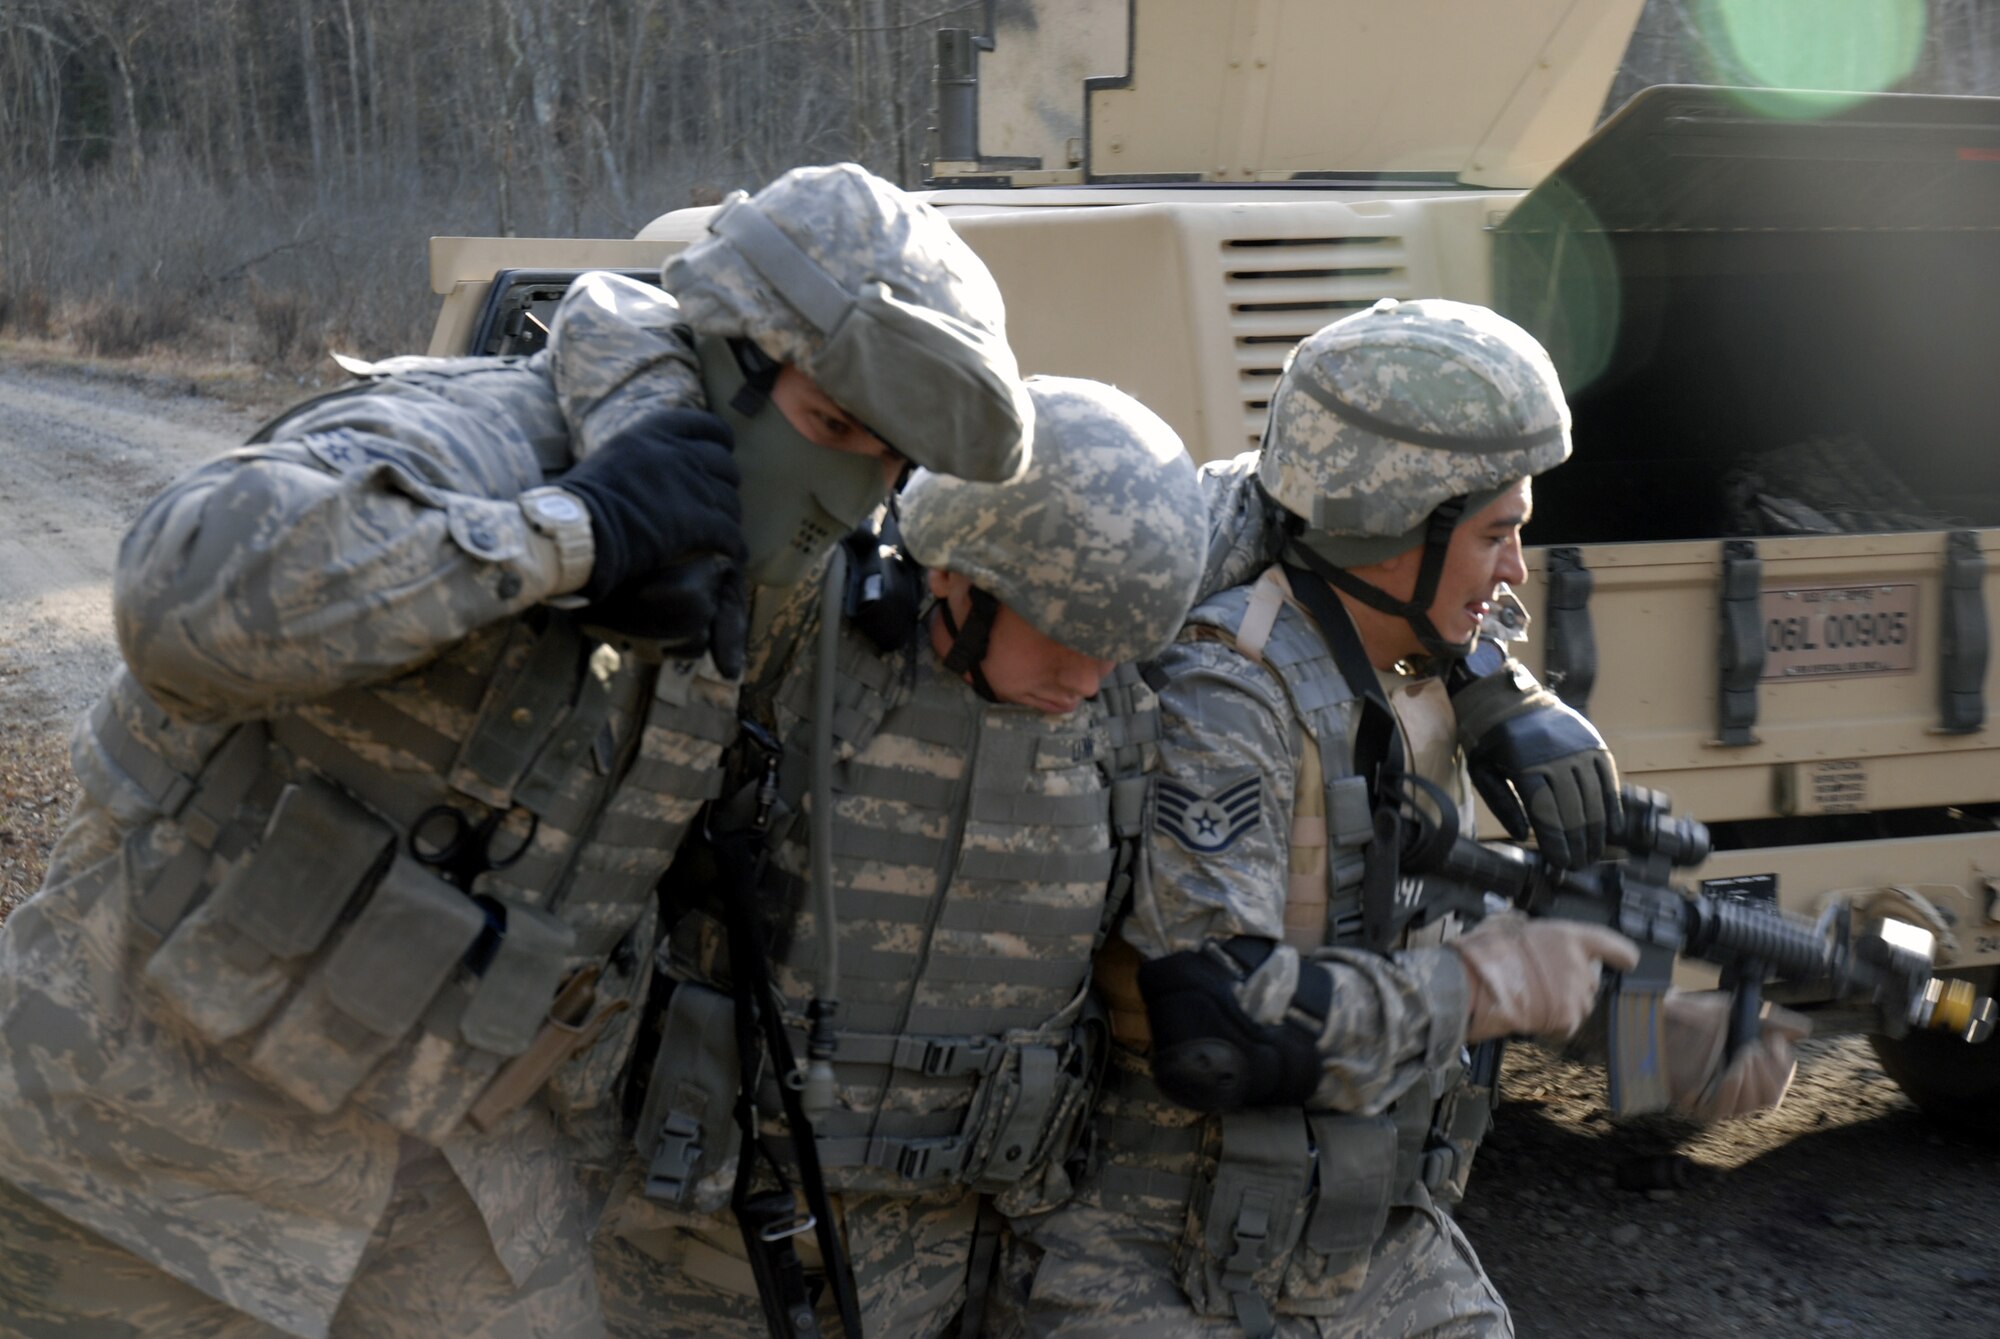 Students in the U.S. Air Force Expeditionary Center's Phoenix Warrior Training Course move an "injured Airman" while taking cover during a scenario for convoy operations training in the course Dec. 5, 2008, on a Fort Dix, N.J., range.  The course is taught by the Center's 421st Combat Training Squadron and prepares security forces Airmen for upcoming deployments. (U.S. Air Force Photo/Staff Sgt. Paul R. Evans)